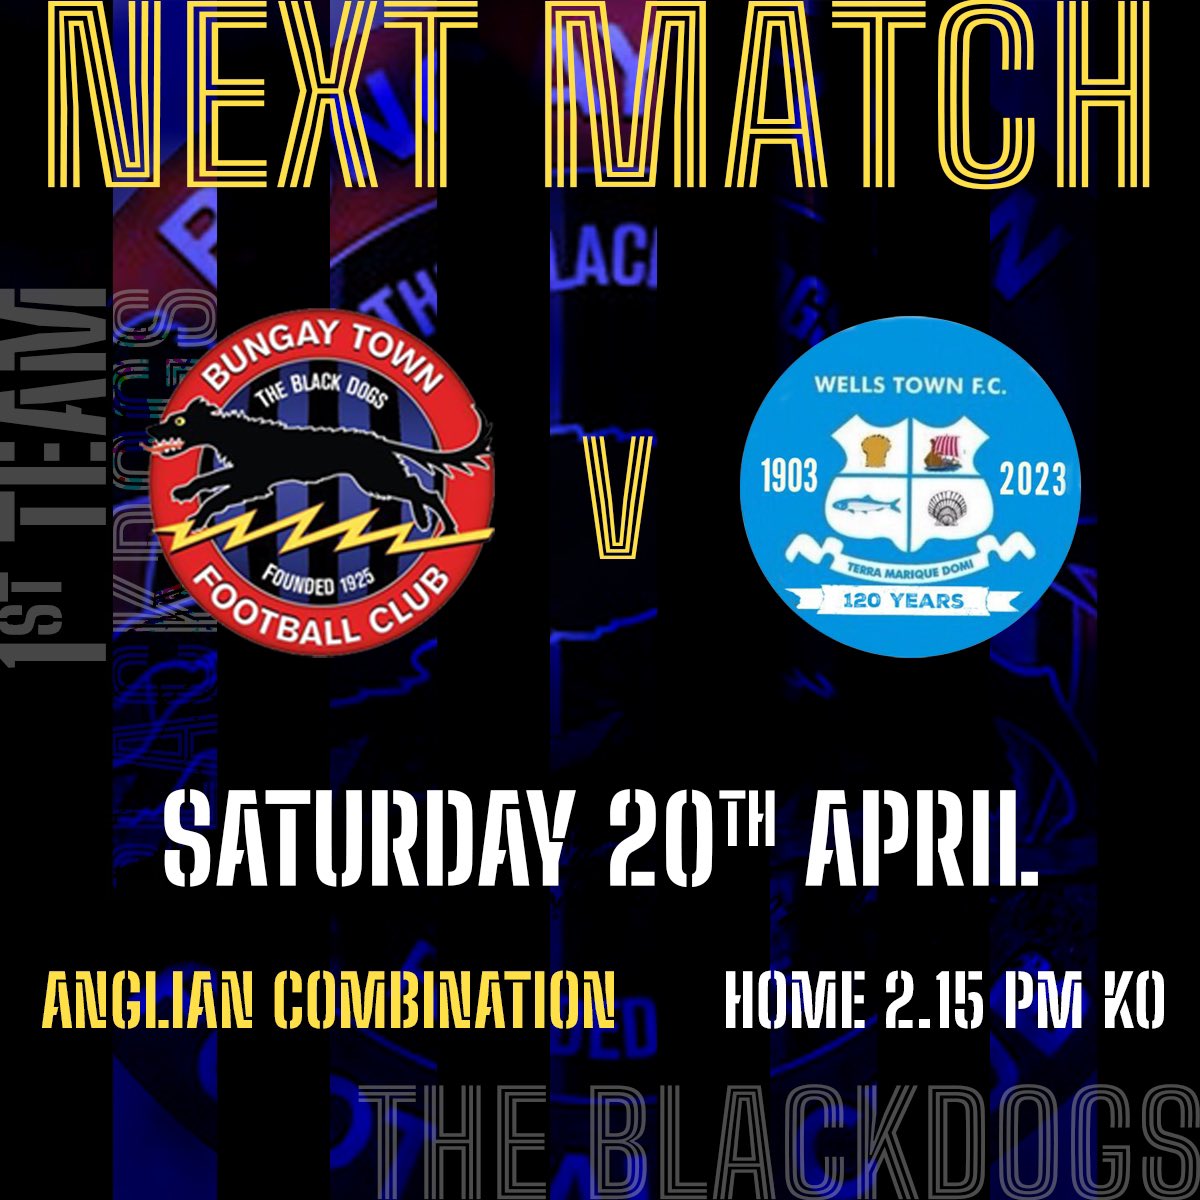 First Team at home again this Saturday as we look to clinch promotion vs @WellsTownFC #blackdogs